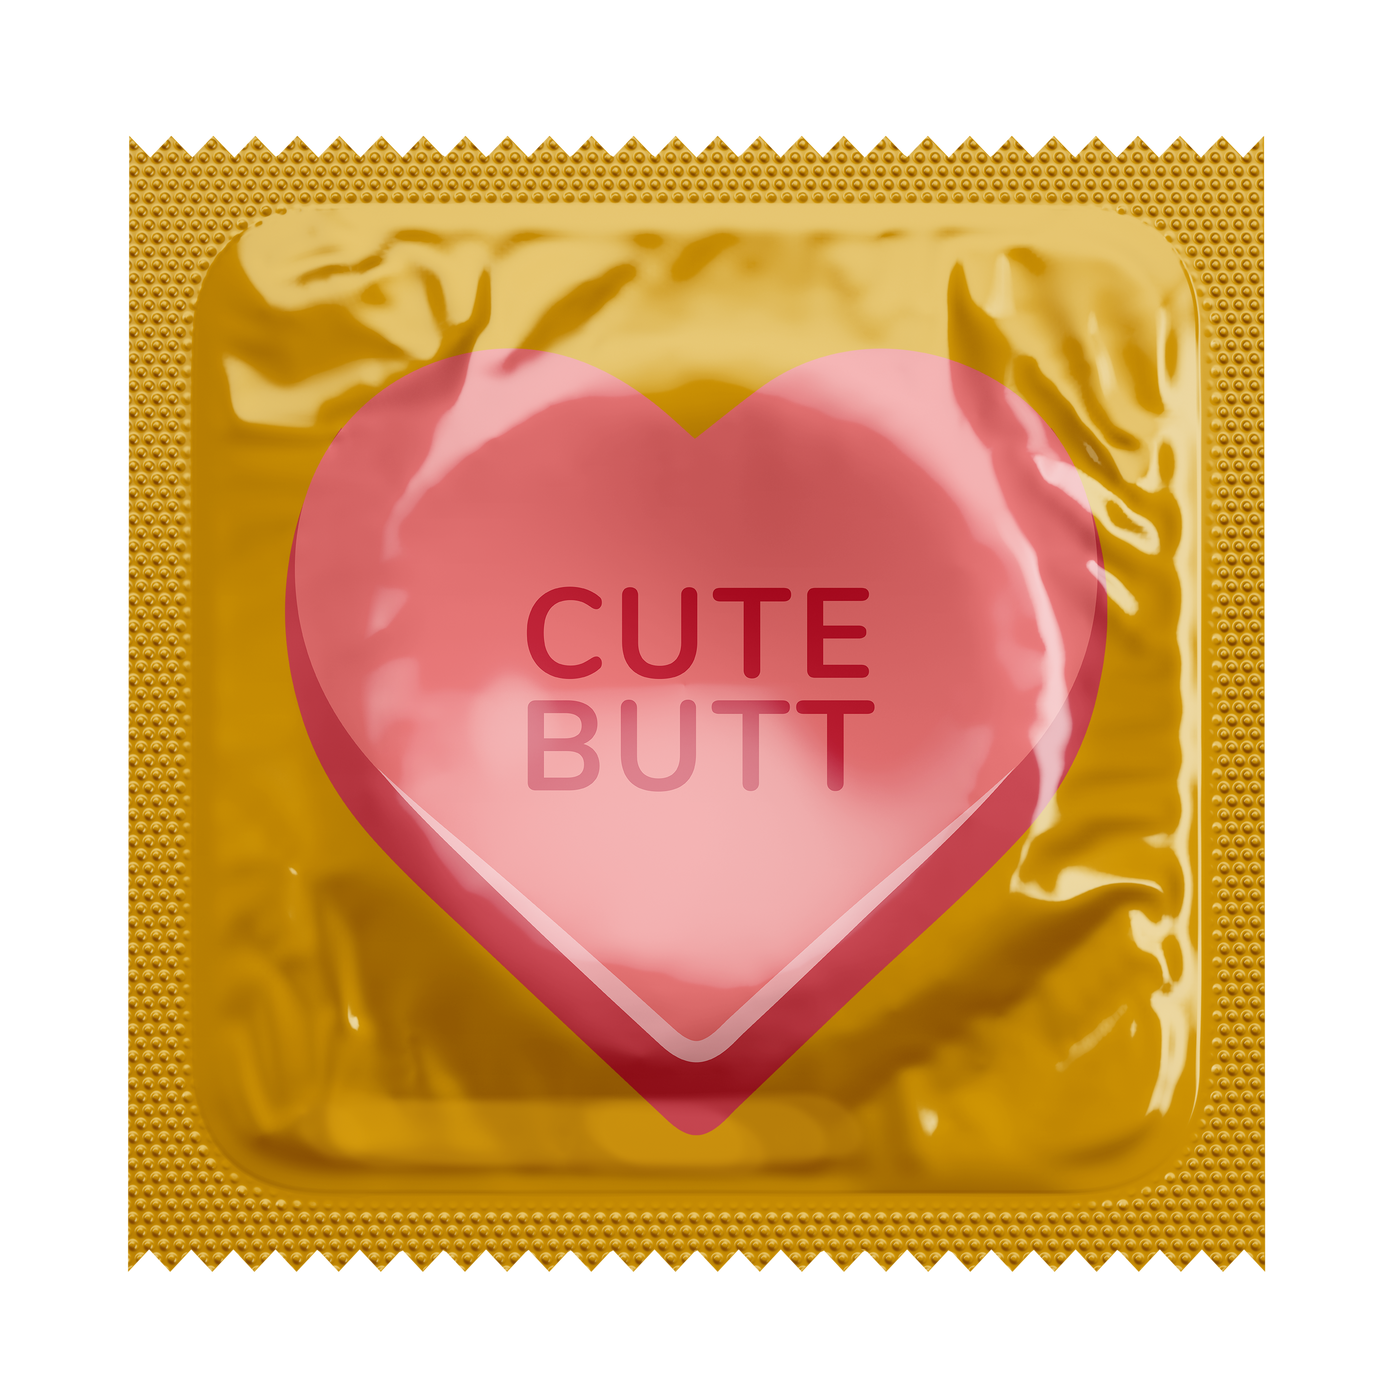 Naughty Candy Hearts Condoms, Bag of 50